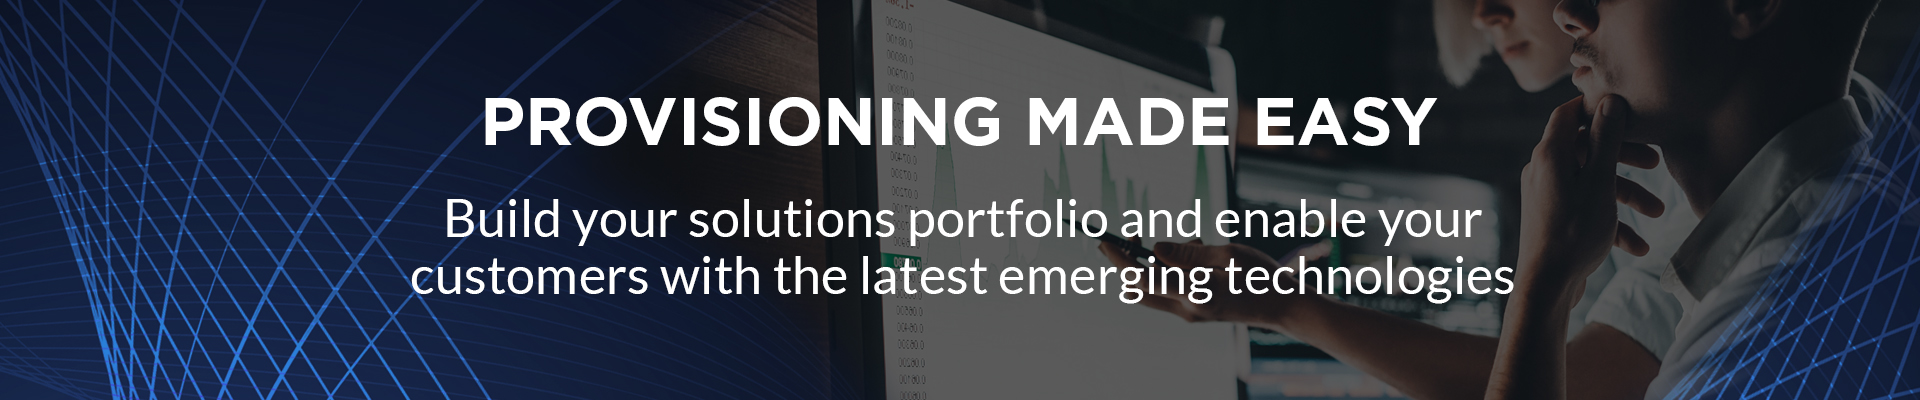 Provisioning Made Easy: Build your solutions portfolio and enable your customers with the latest emerging technologies